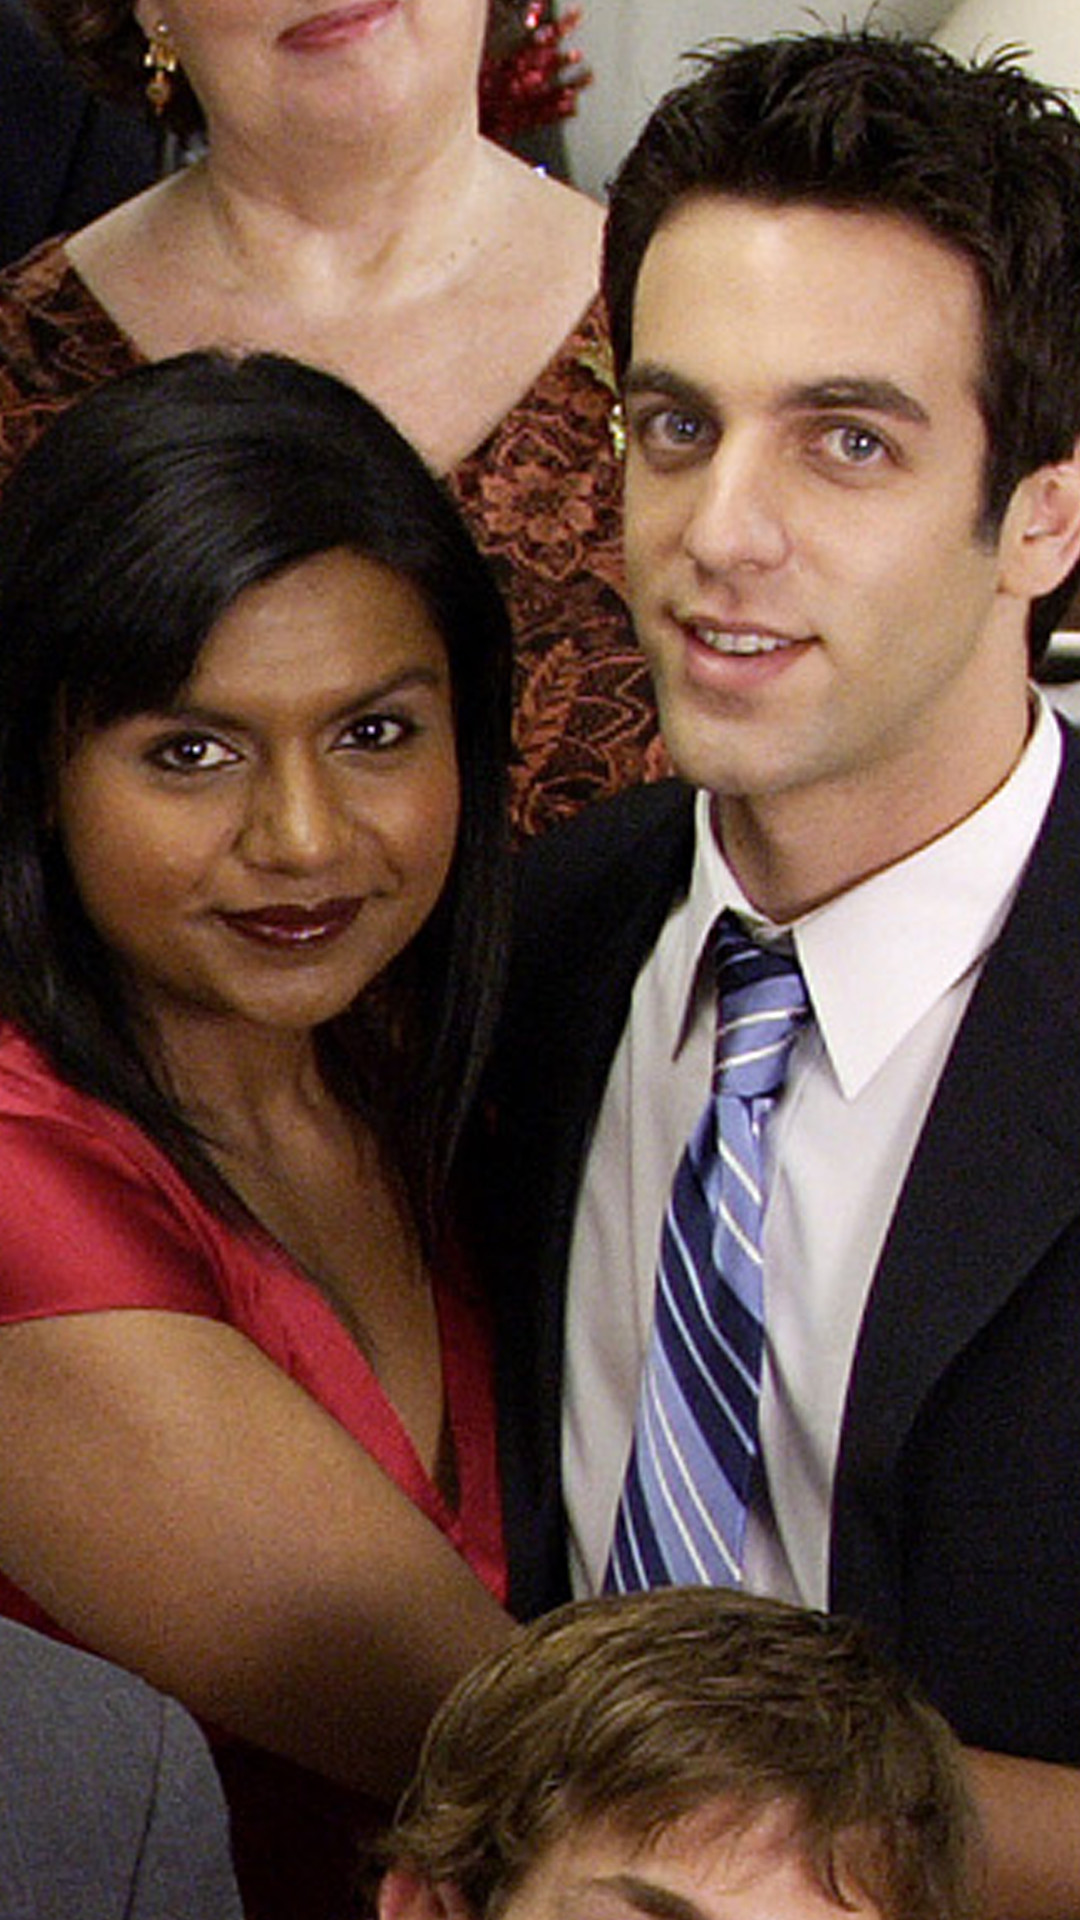 Mindy Kaling Reveals What Bothered Her About The Office - E! Online